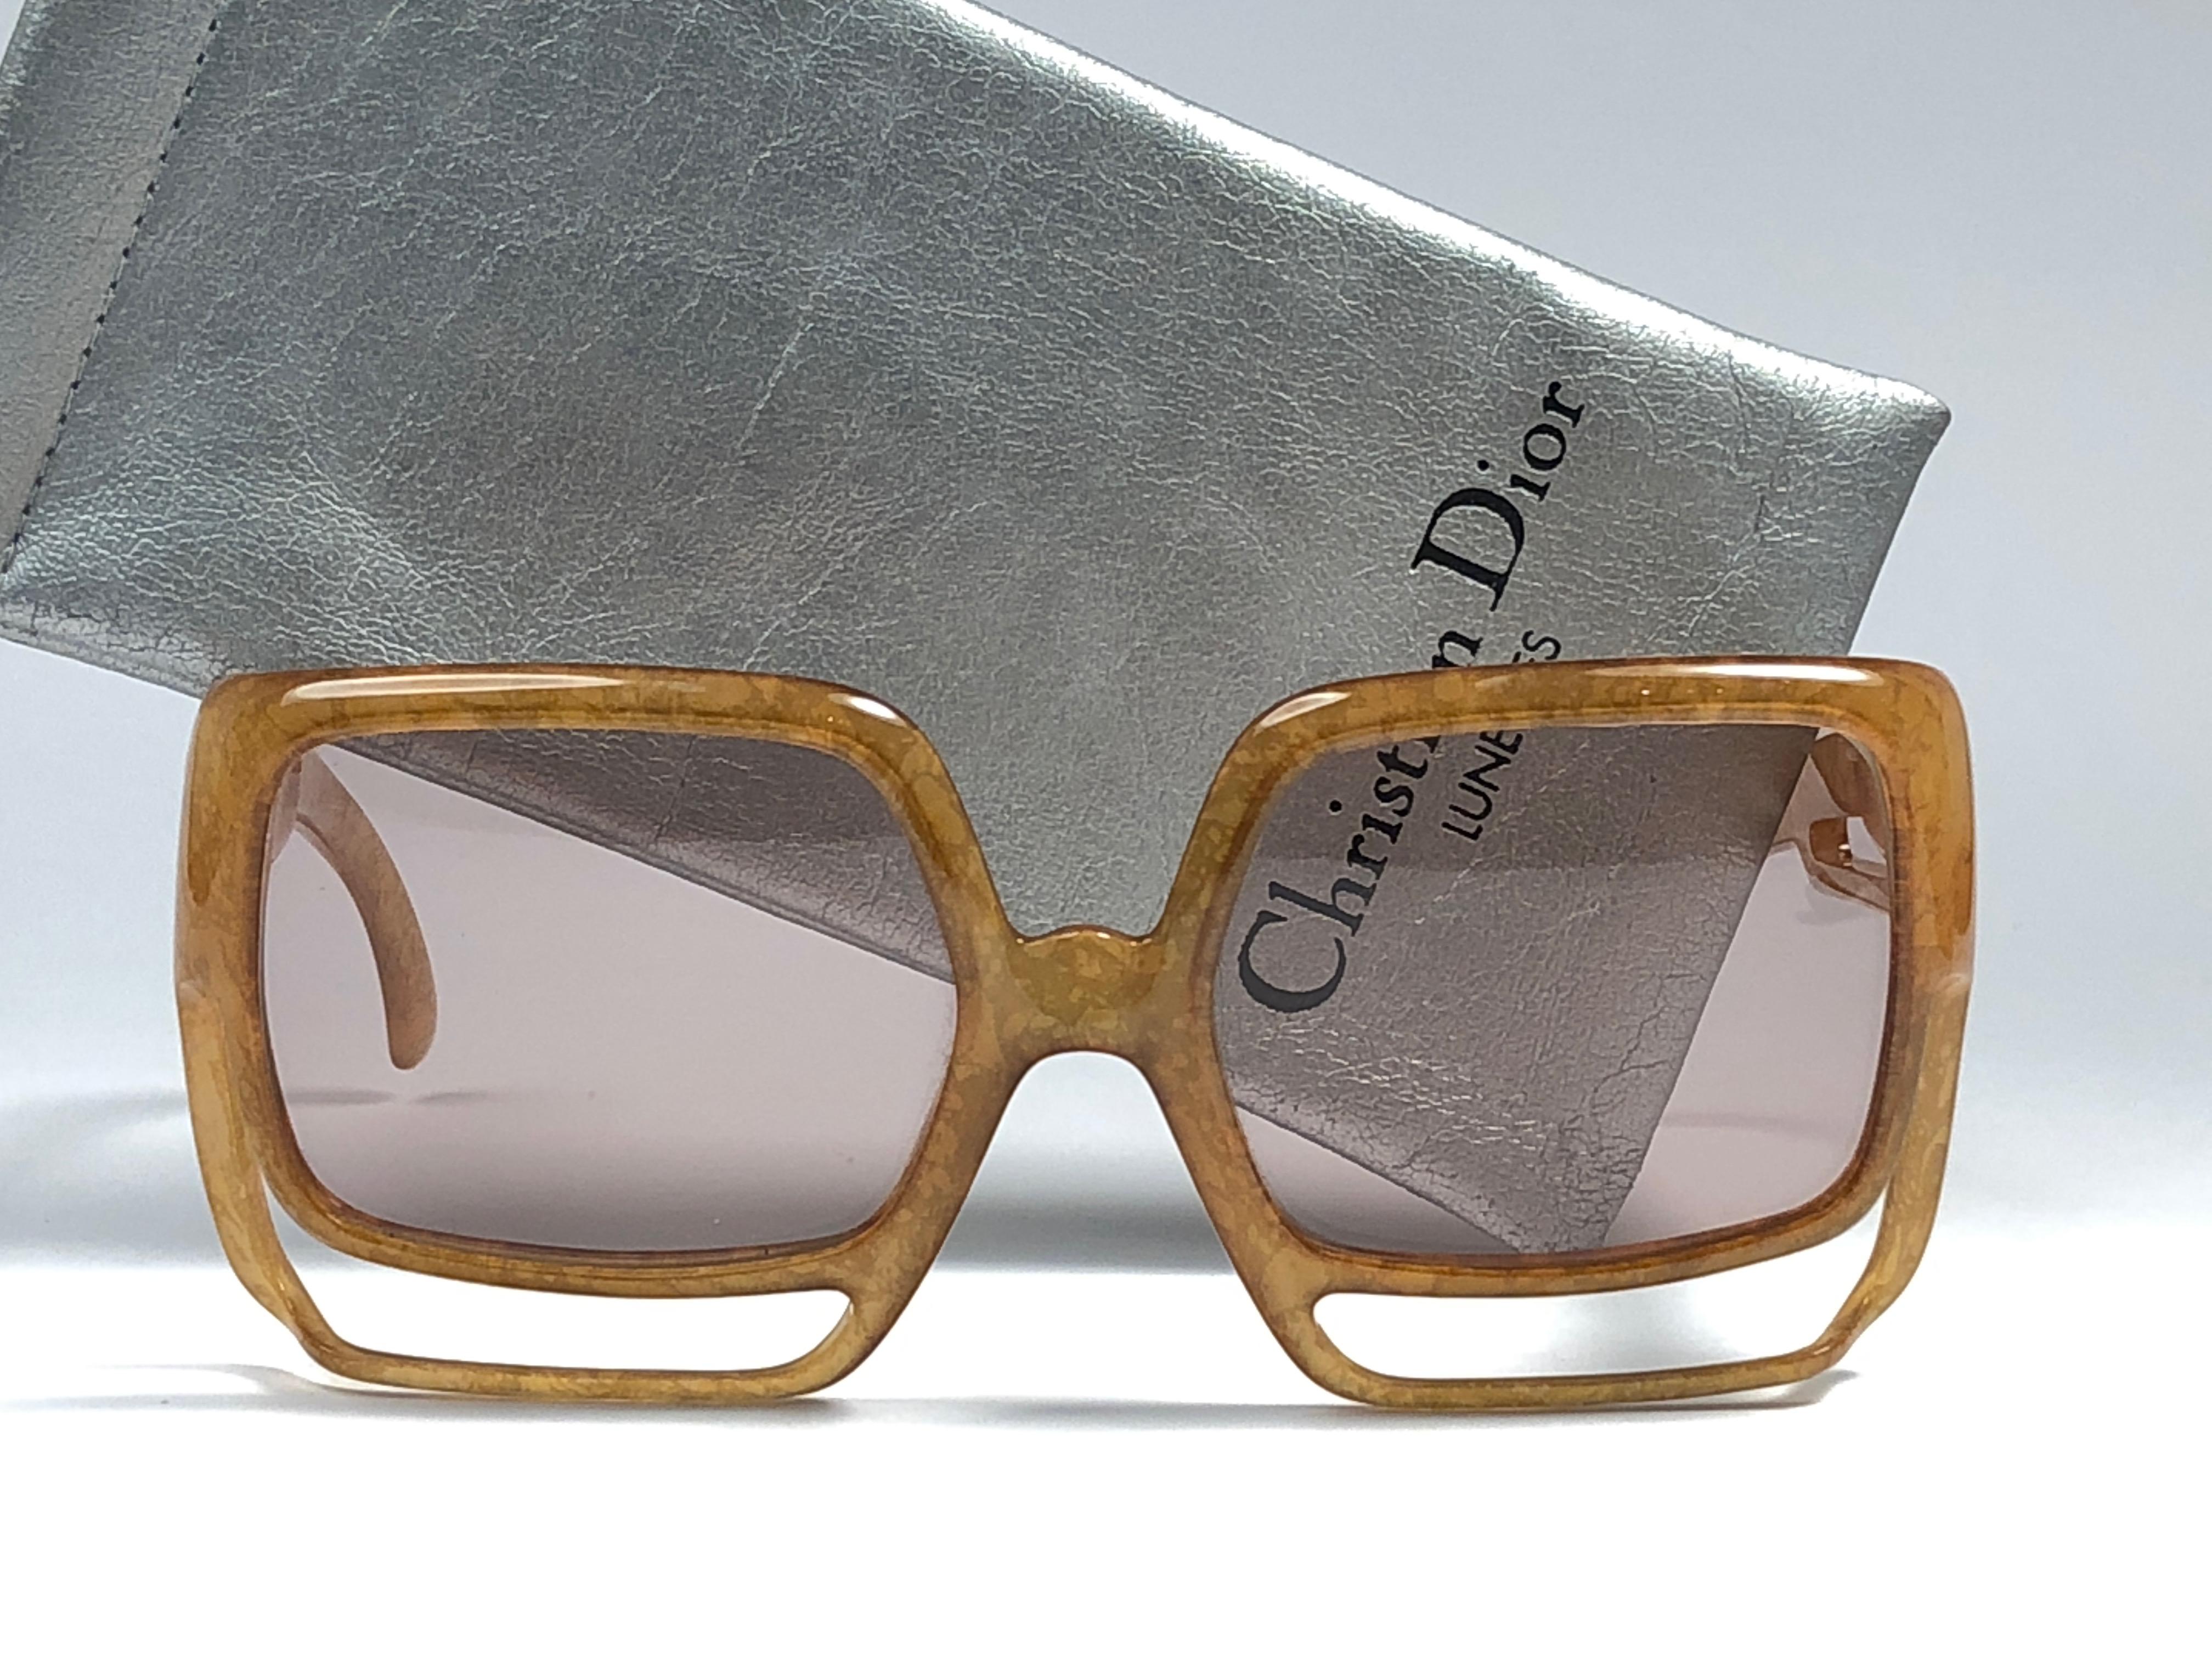 New Vintage Christian Dior 2029 10 light amber jasped frame sporting light gradient lenses. 

Made in Germany.
 
Produced and design in 1970's.

A collector’s piece!

New, never worn or displayed. Comes with its original silver Christian Dior